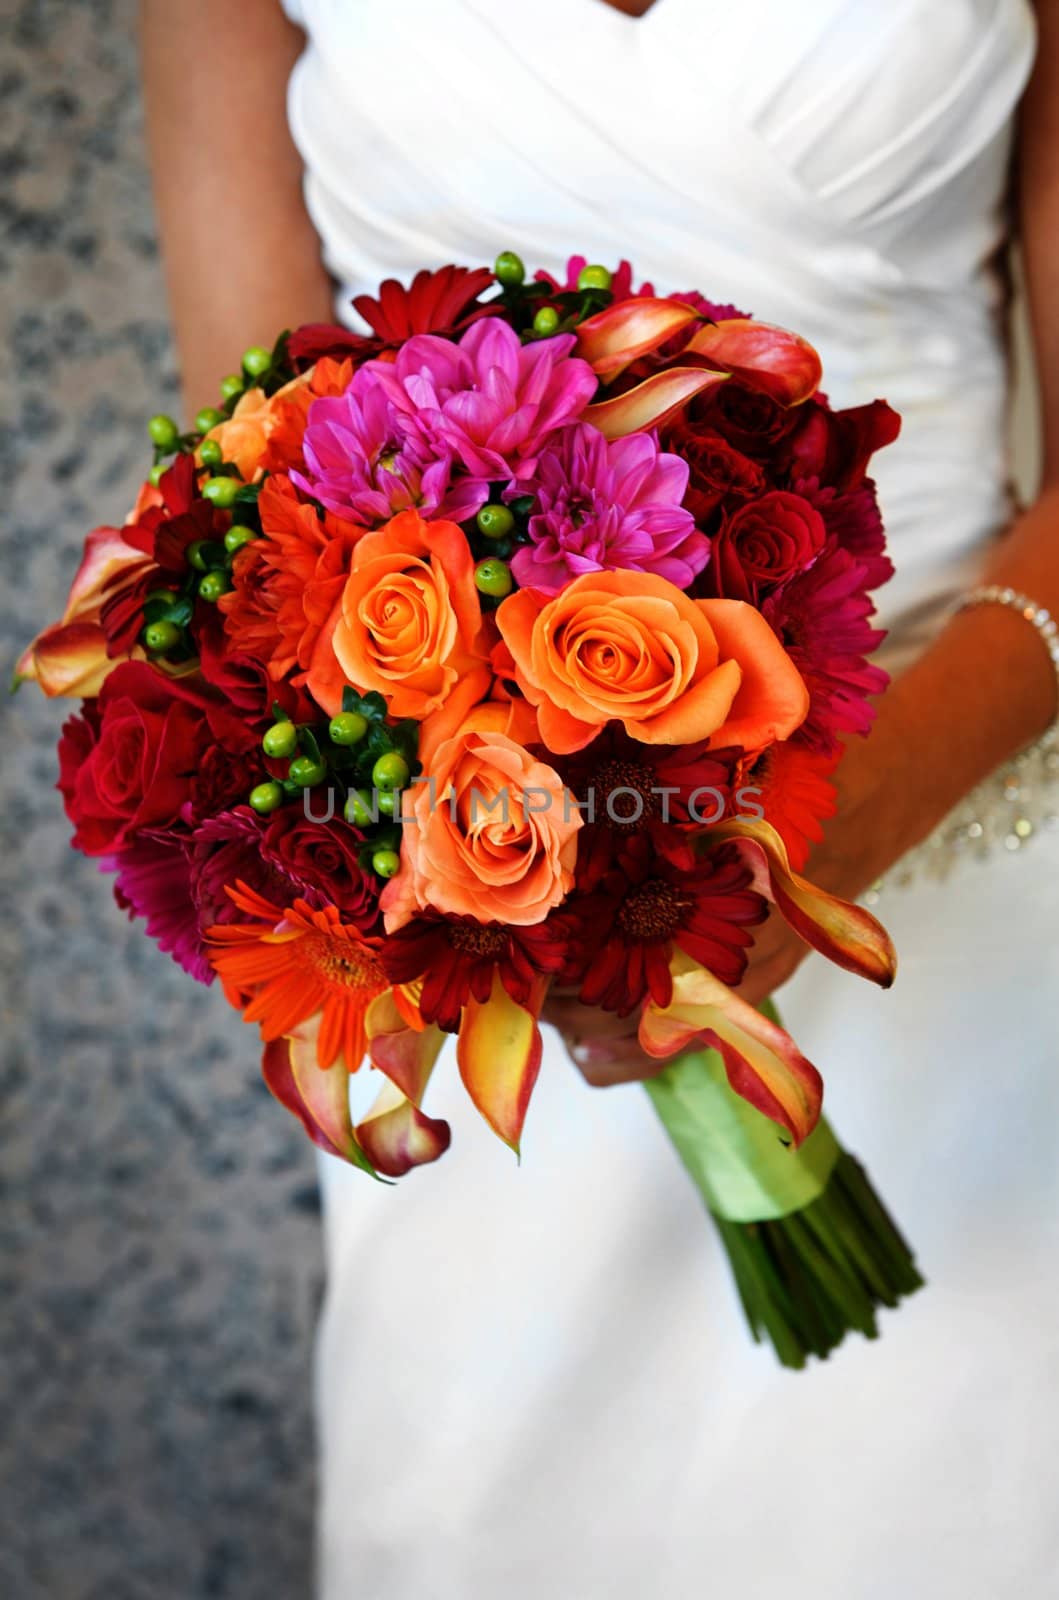 Bride Holding Colorful Large Bouquet by gregory21